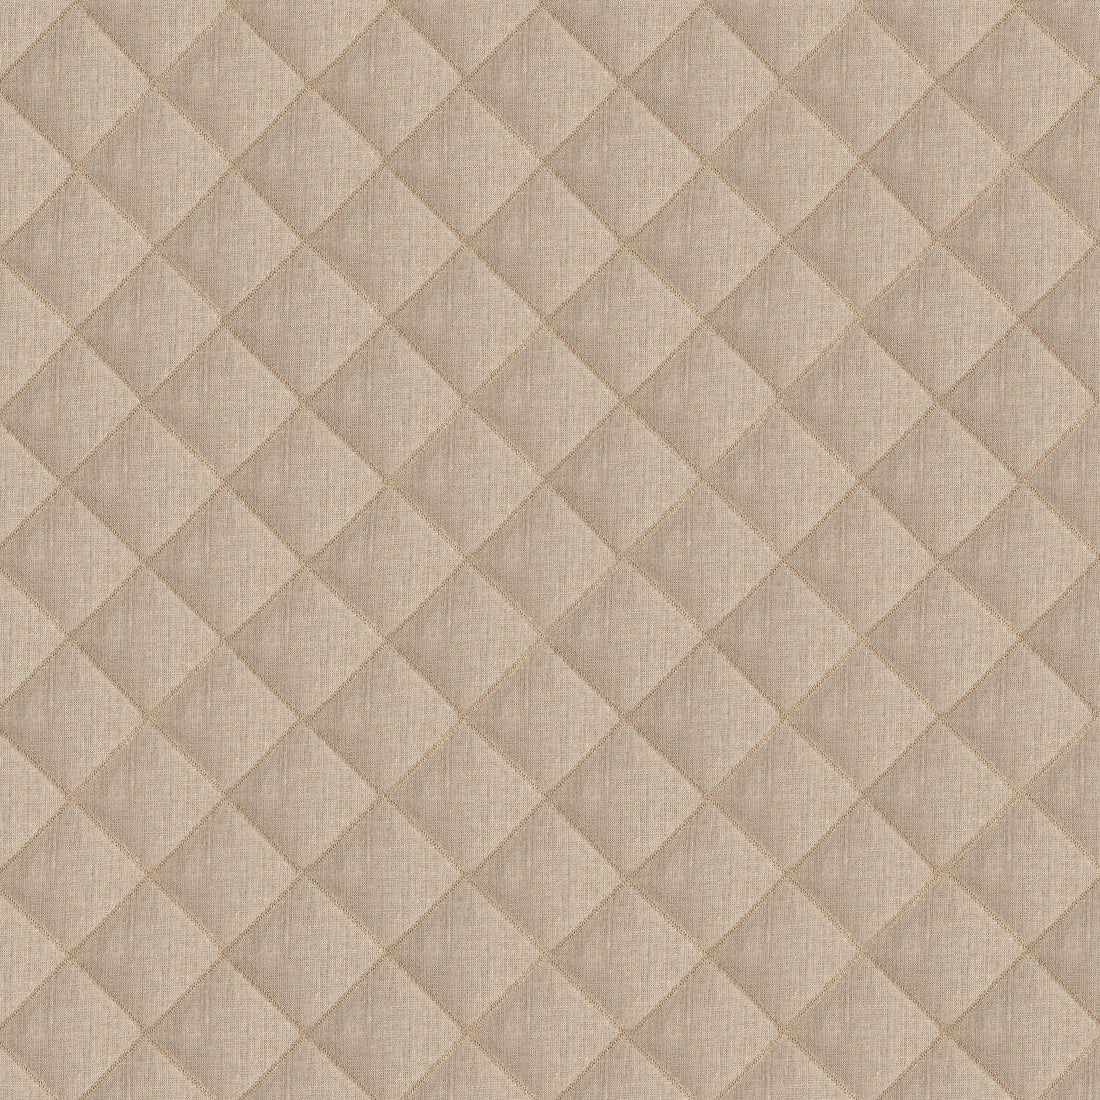 Prussia Quilt fabric in natural color - pattern number AW9109 - by Anna French in the Natural Glimmer collection